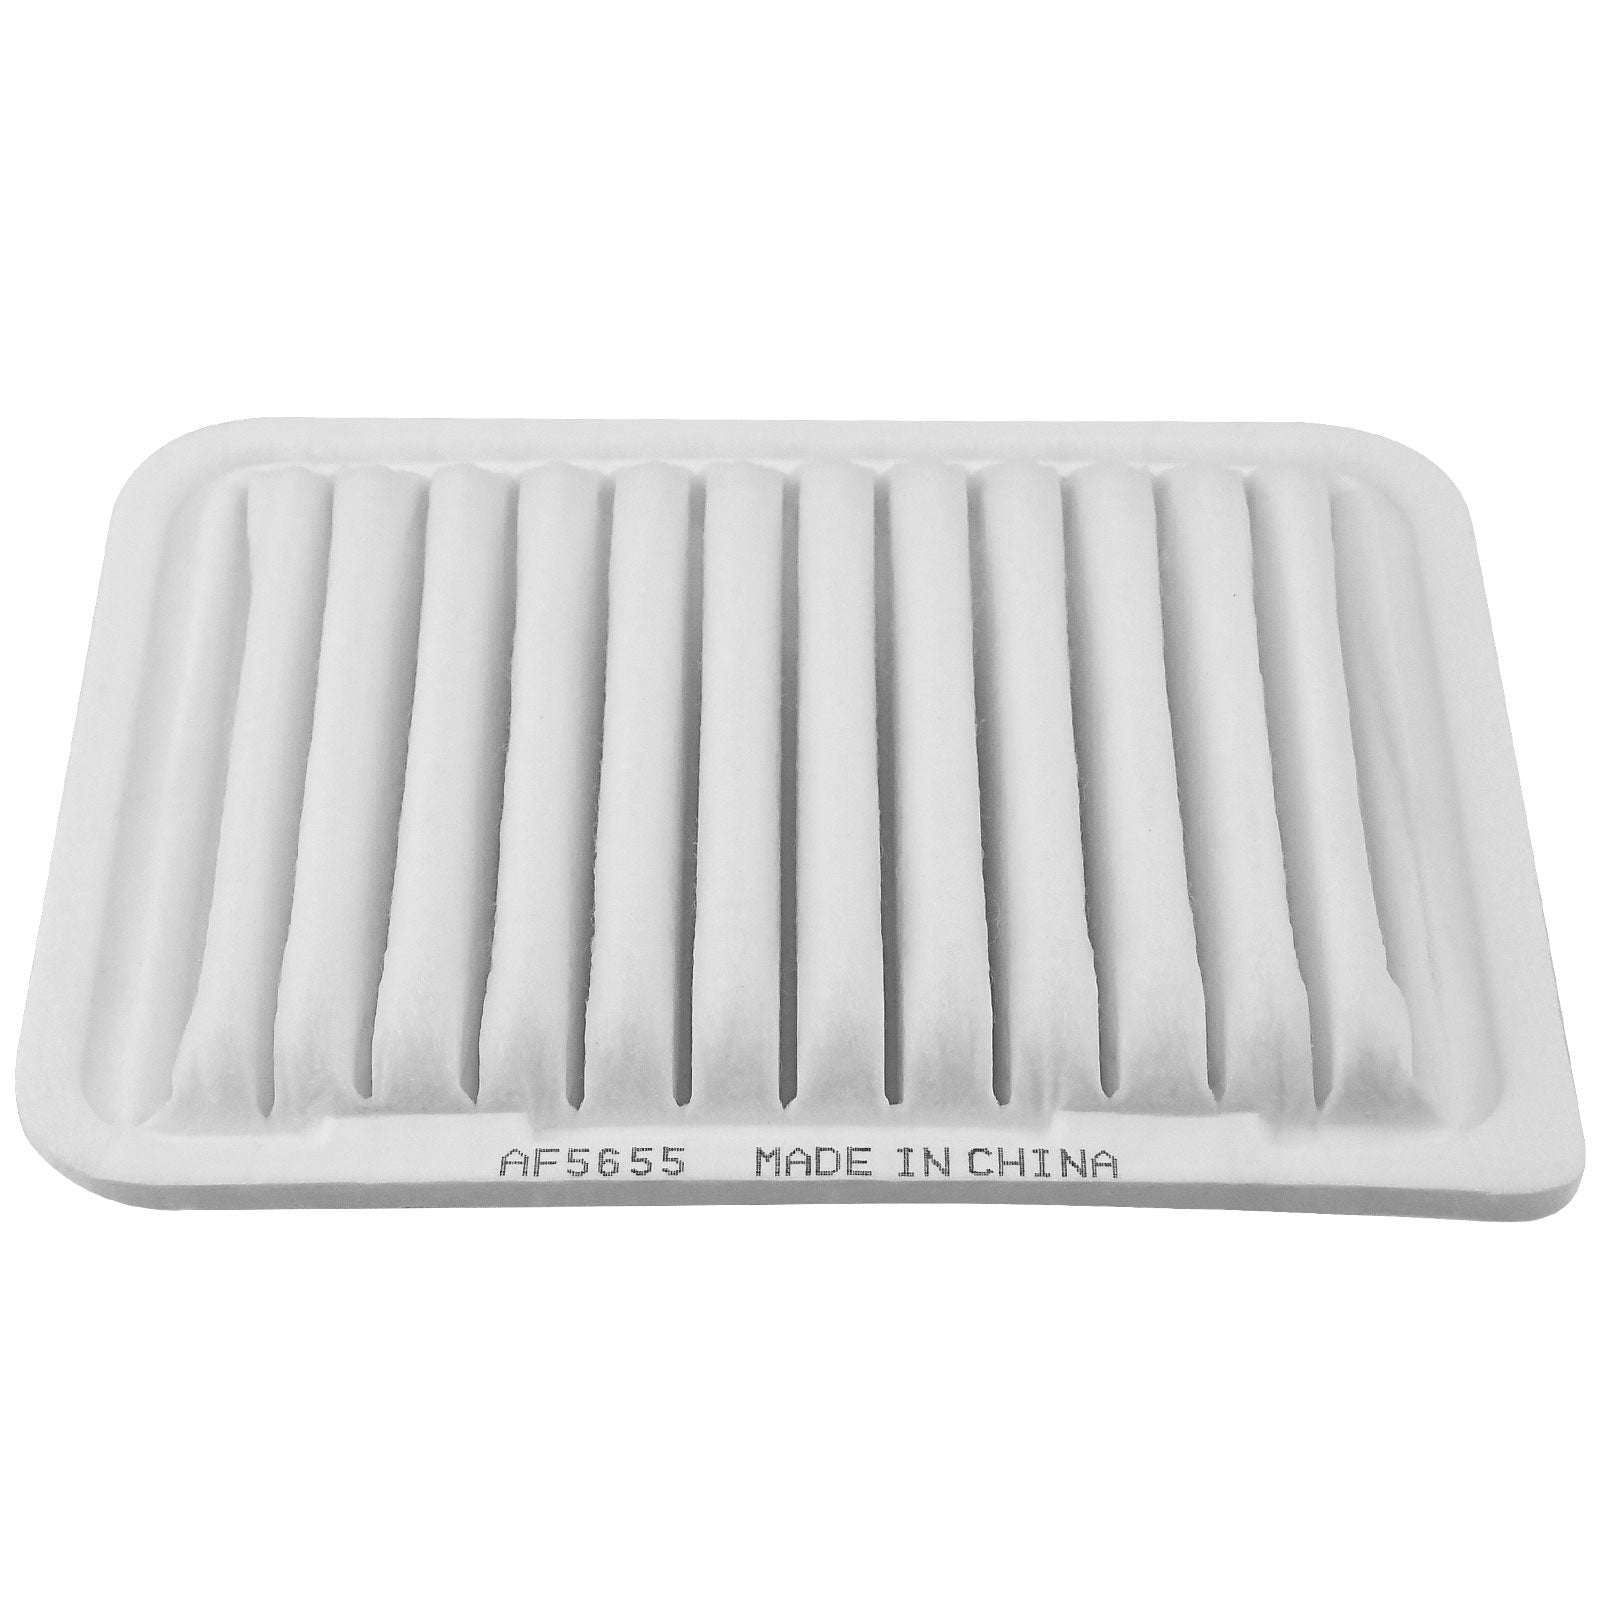 MotorbyMotor CAF5655 Cabin Air Filter for Toyota Corolla Matrix (1.8L ONLY), Toyota Yaris; Scion XD (All Models), Pontiac Vibe (1.8L) Premium Air Filter MotorbyMotor